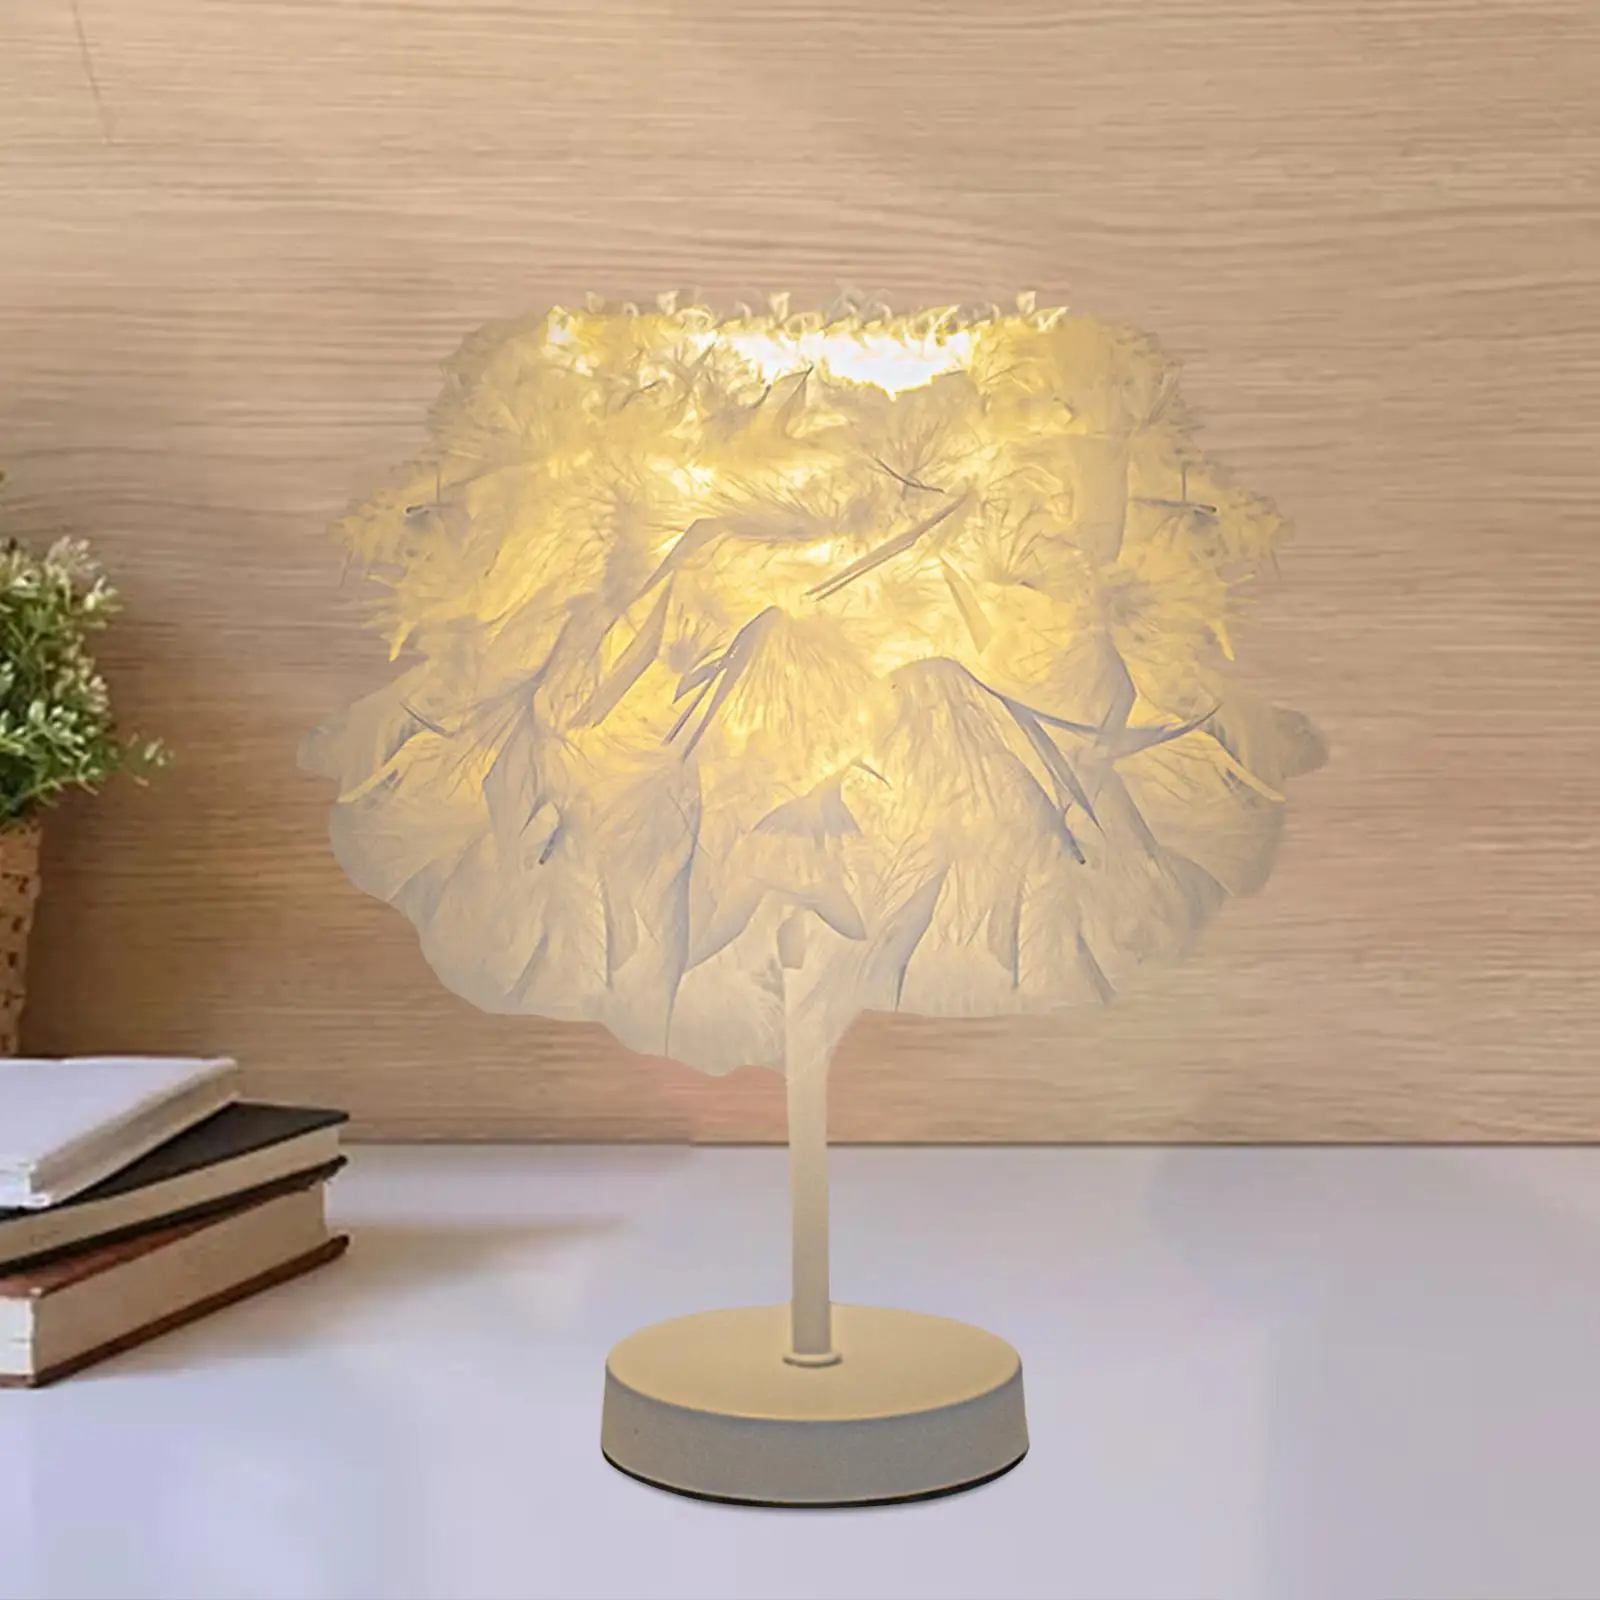 Modern Desk Light Decorative Lighting Fixture Lantern Feathers Table Lamp for Dining Room Home NightStand Bedside Wedding